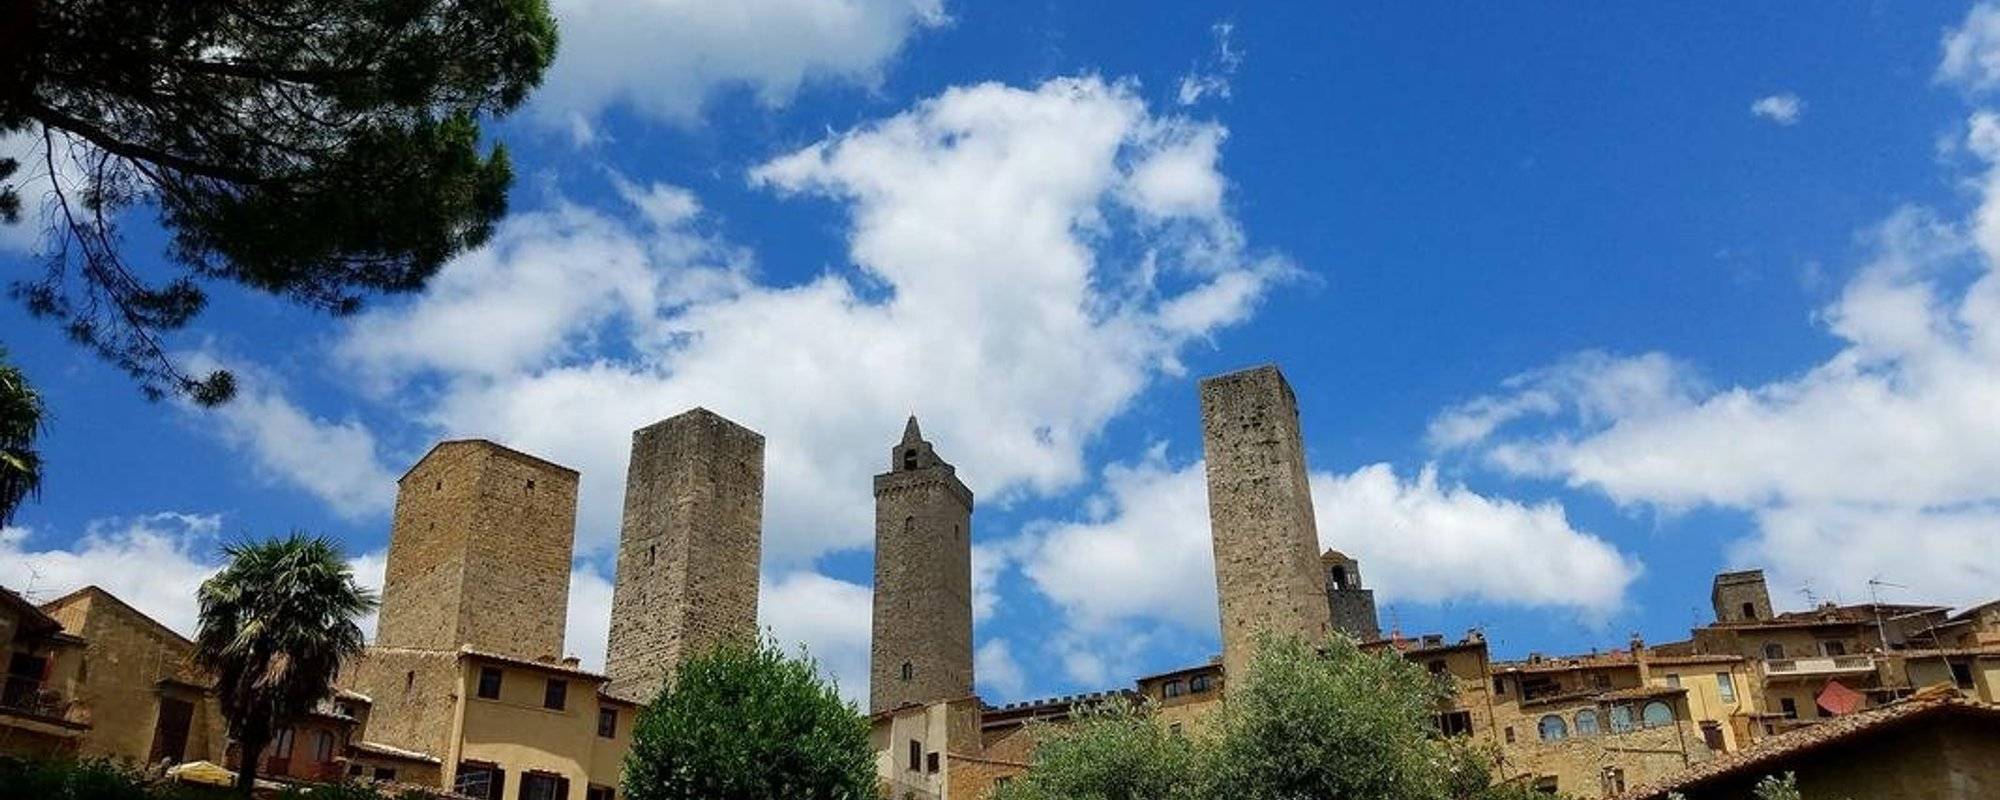 TRAVELMAN SAN GIMIGNANO, ITaLY: There’s Goes to Eleven